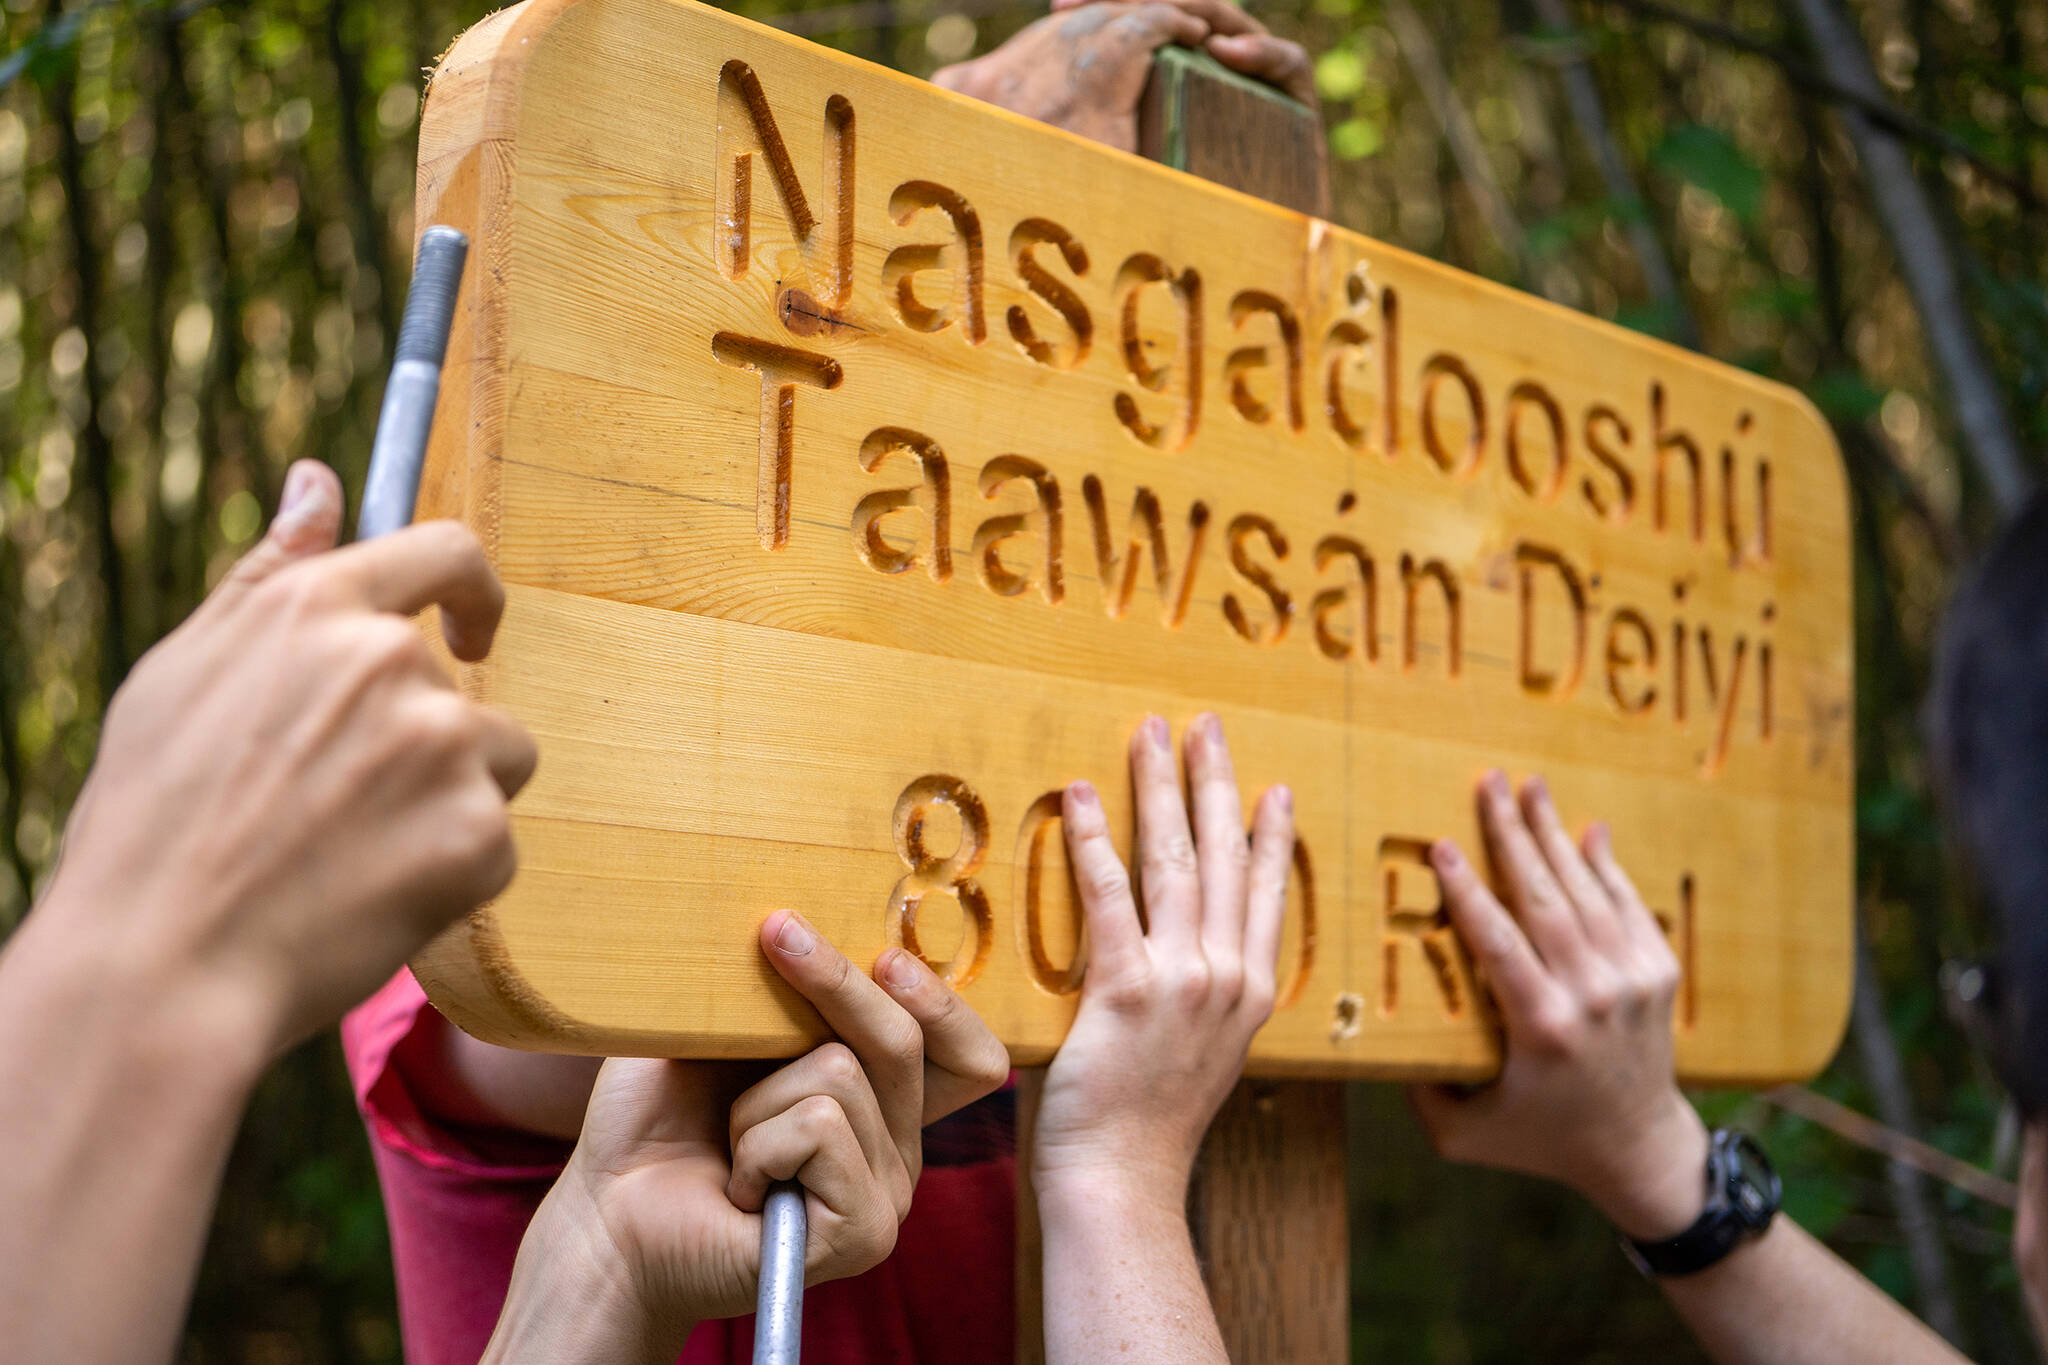 photos by Lee House / Sitka Conservation Society 
Many hands help to get the work done. Participants of the Alaska Youth Stewards program in Kake install a Lingít/English road sign, a project in partnership with community elders and the U.S. Forest Service.